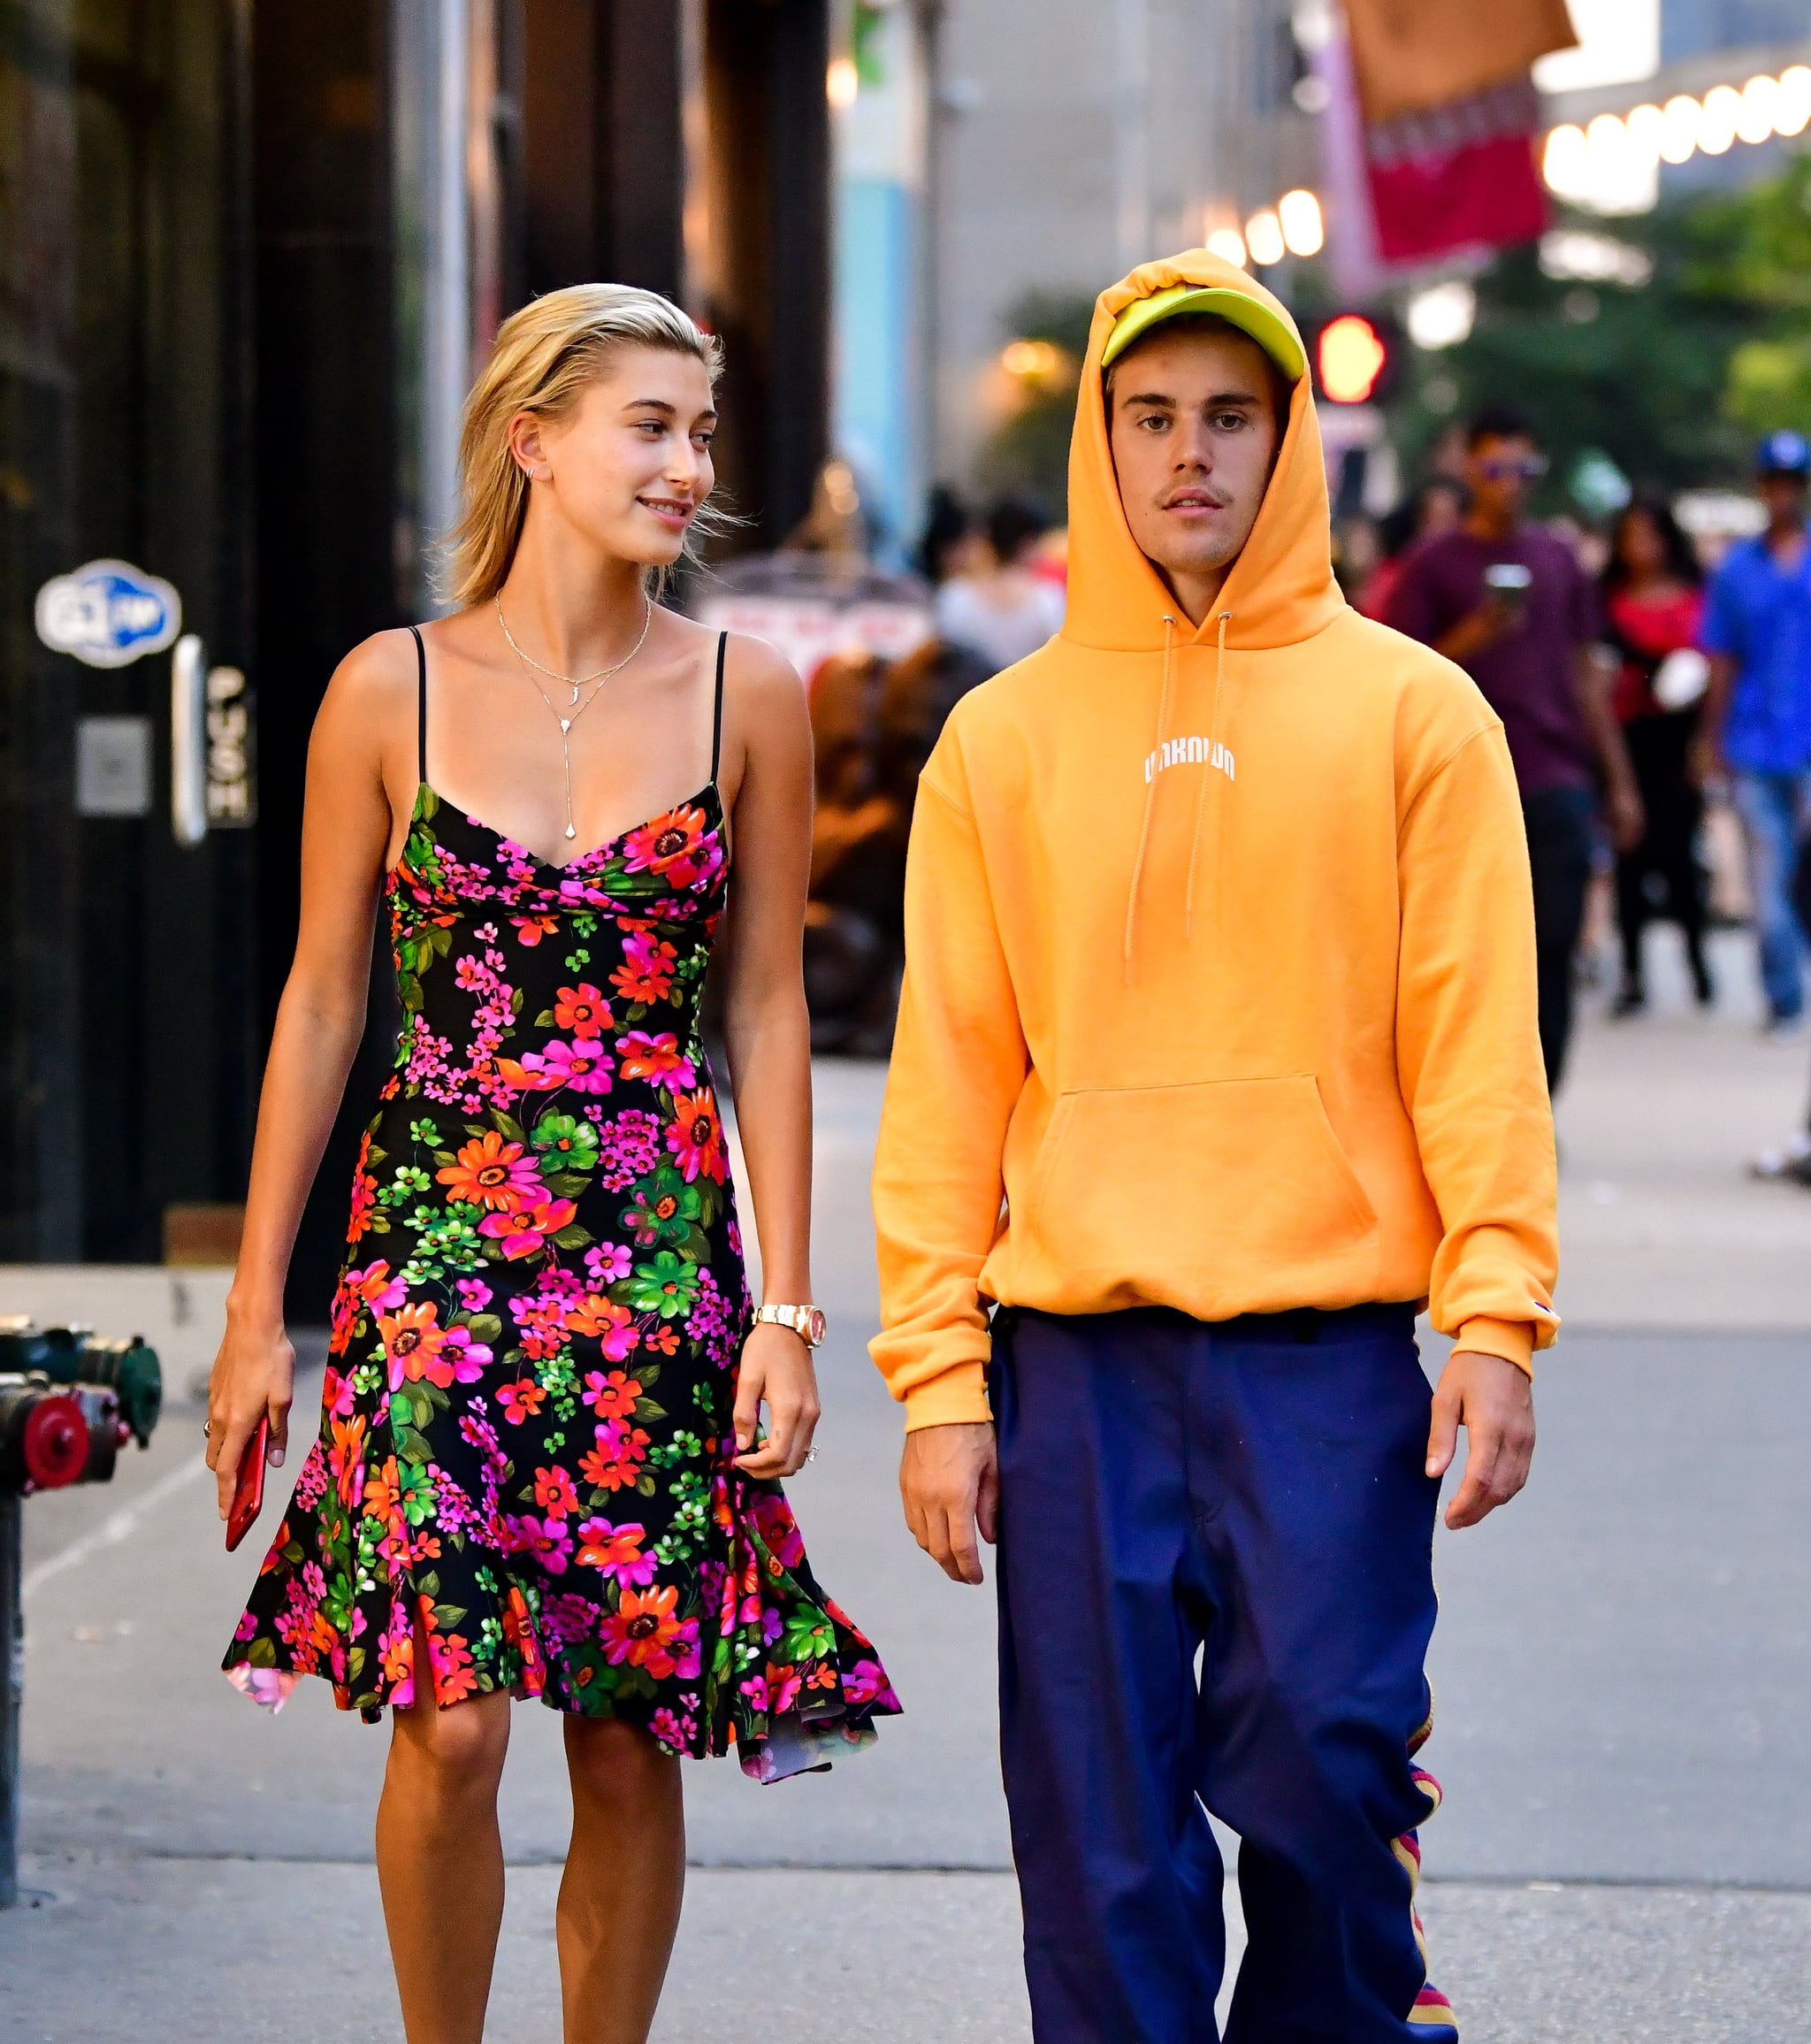 NEW YORK, NY - AUGUST 06:  Hailey Baldwin and Justin Bieber seen on the streets of Midtown Manhattan on August 6, 2018 in New York City.  (Photo by James Devaney/GC Images)